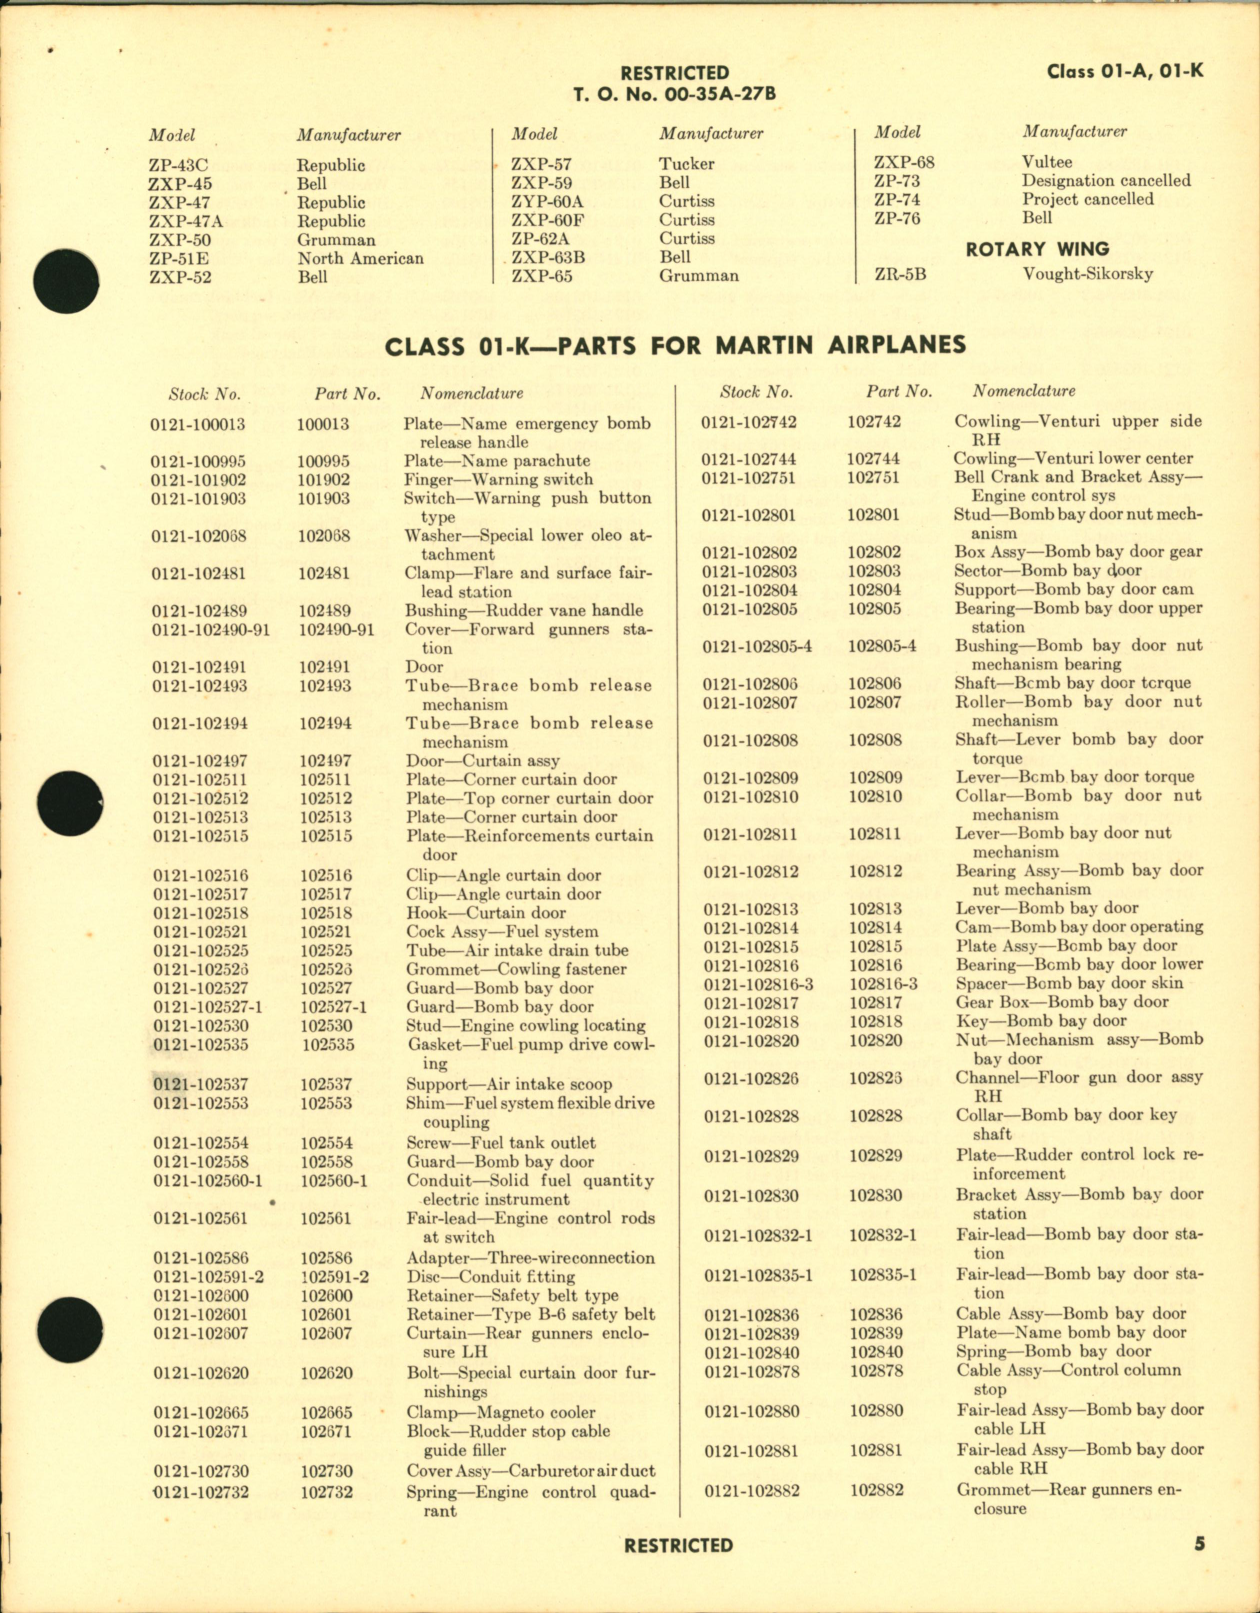 Sample page 7 from AirCorps Library document: Consolidating Catalog for Obsolete Equipment and Materials Volume II